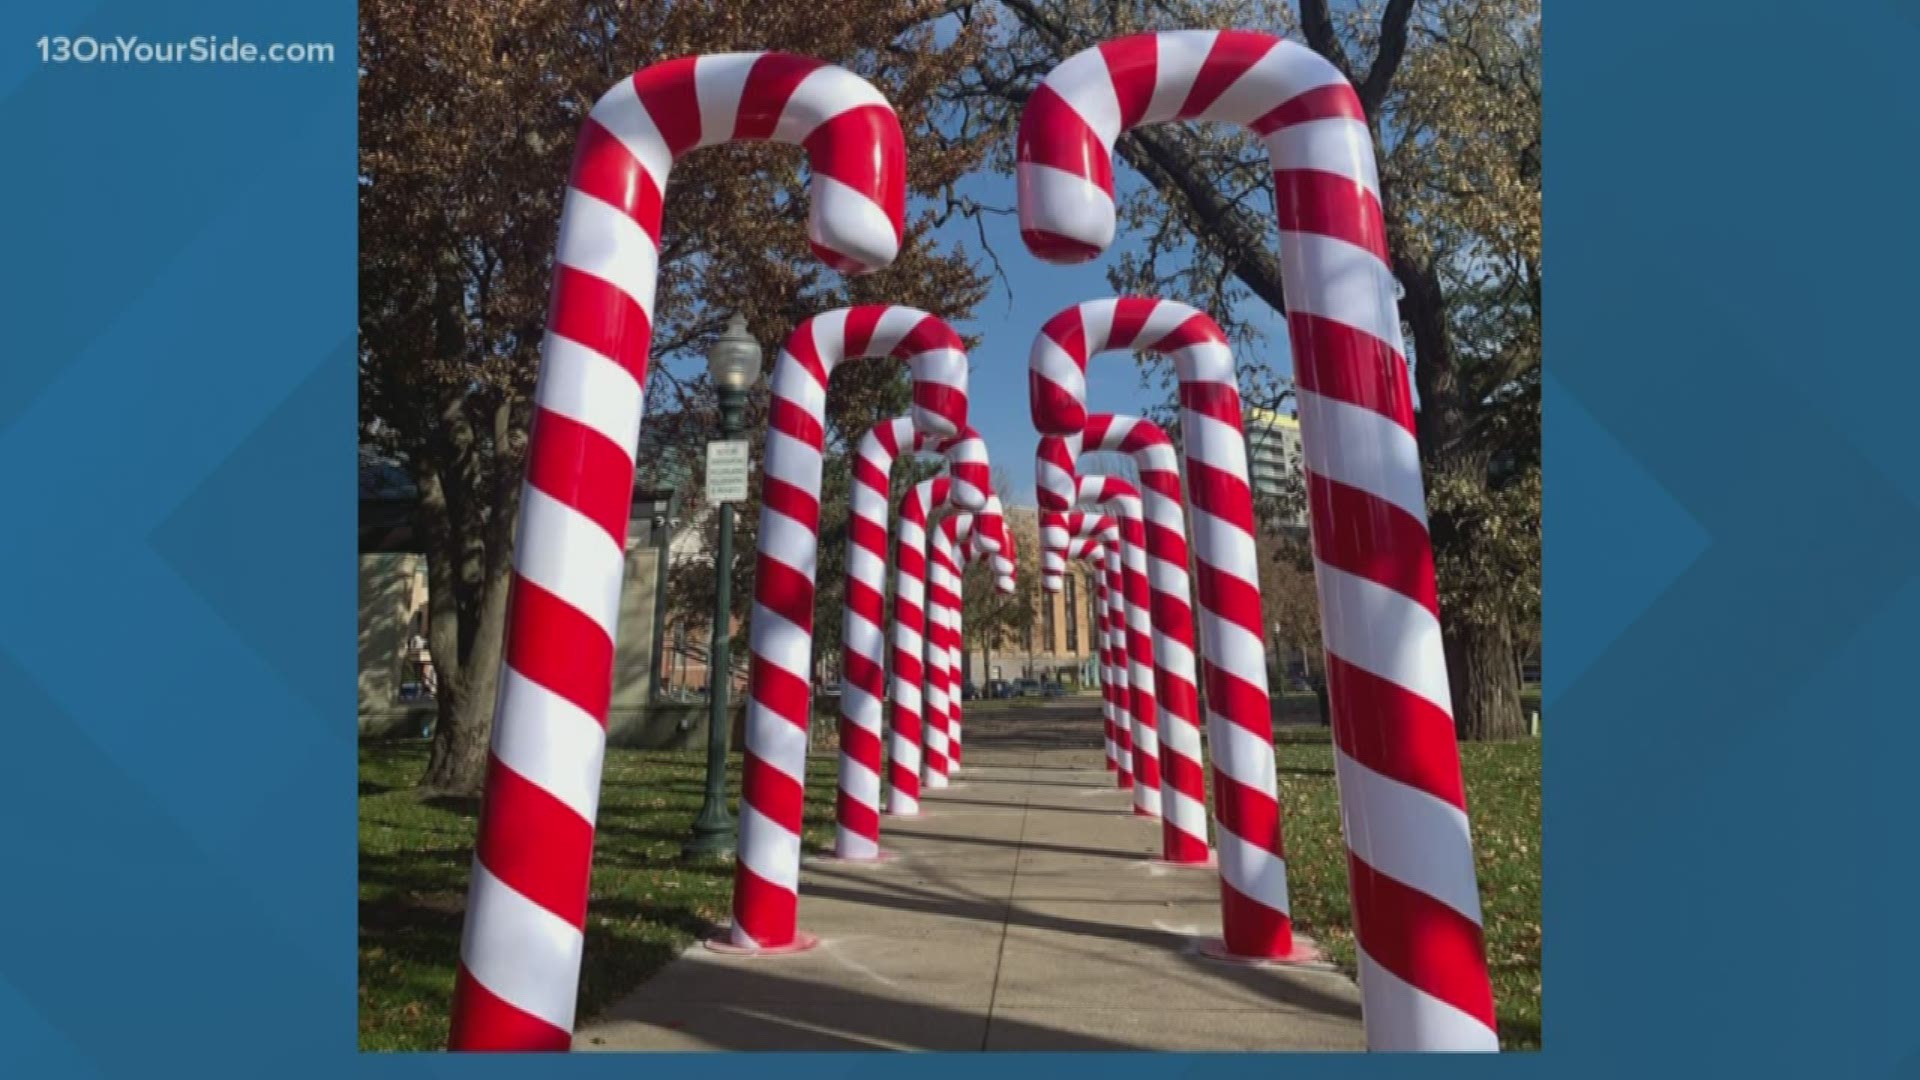 Some Kalamazoo residents are in an uproar over a new change to the Bronson Park Candy Cane Lane, so My West Michigan took a stab at the debate.